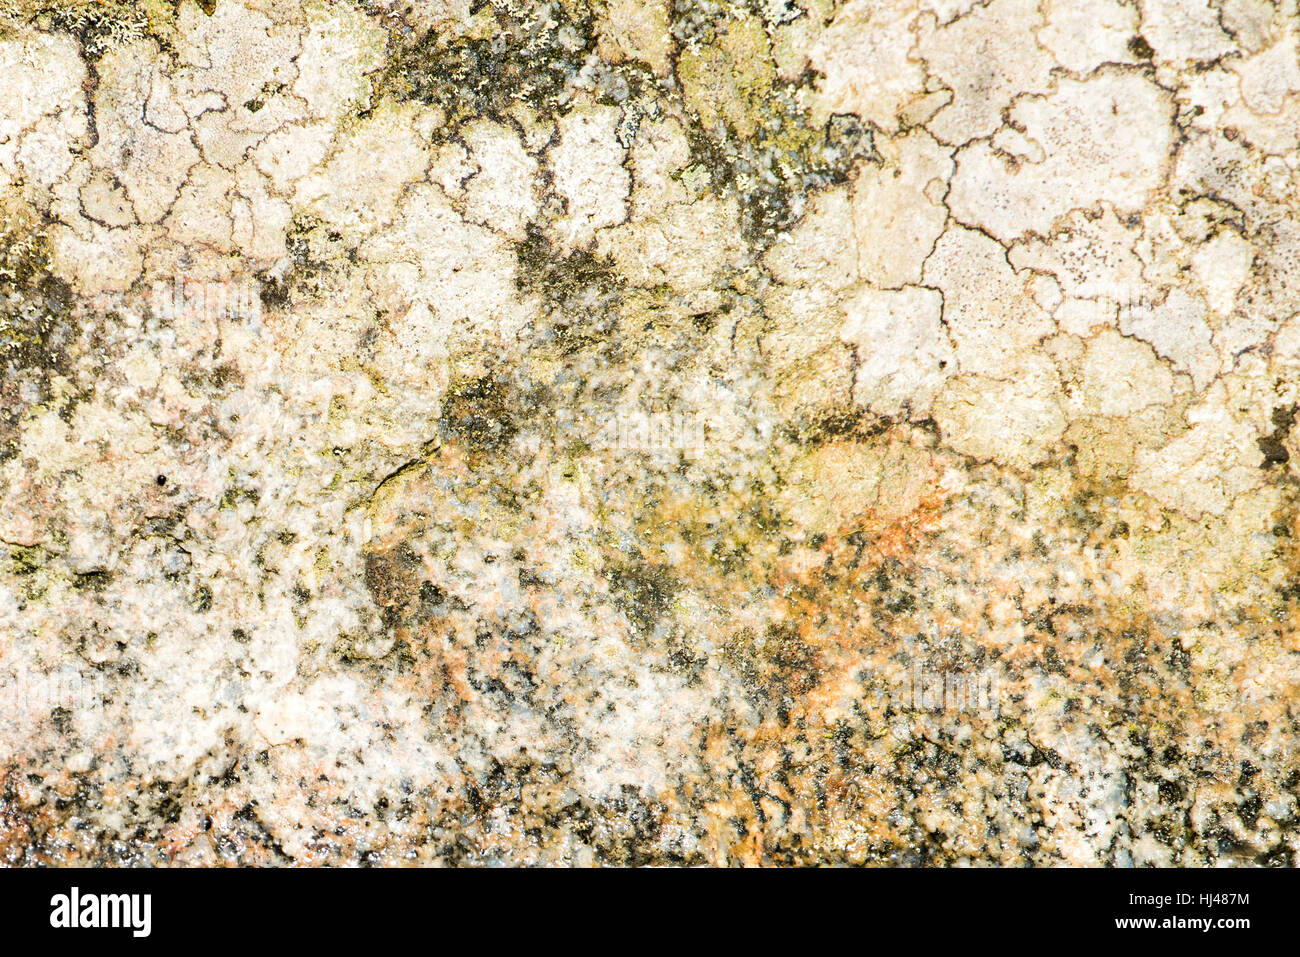 Natural background texture, lichen and moss growing on a stone Stock Photo